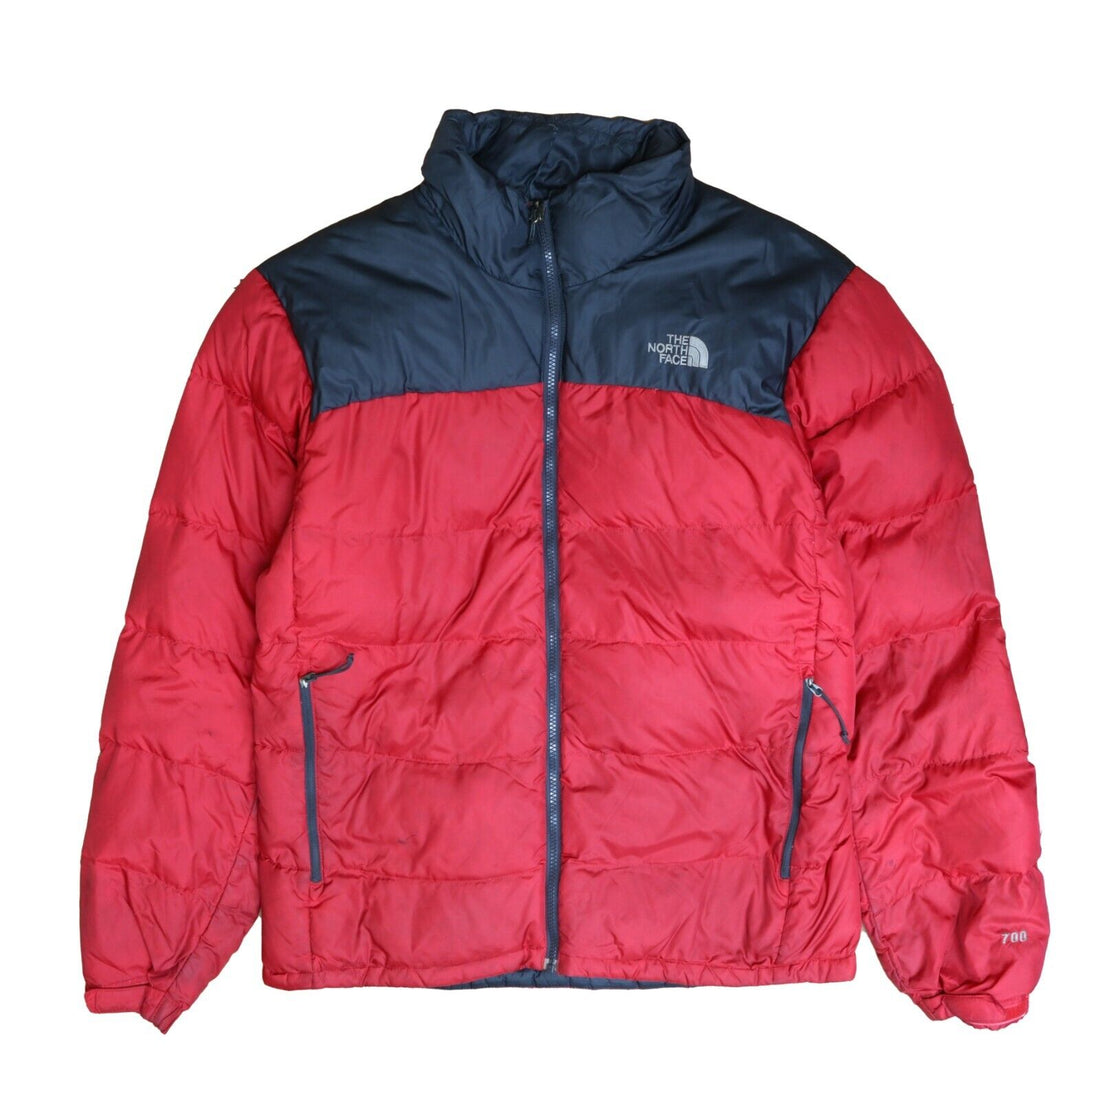 The North Face Puffer Jacket Size Large Red 700 Down Insulated